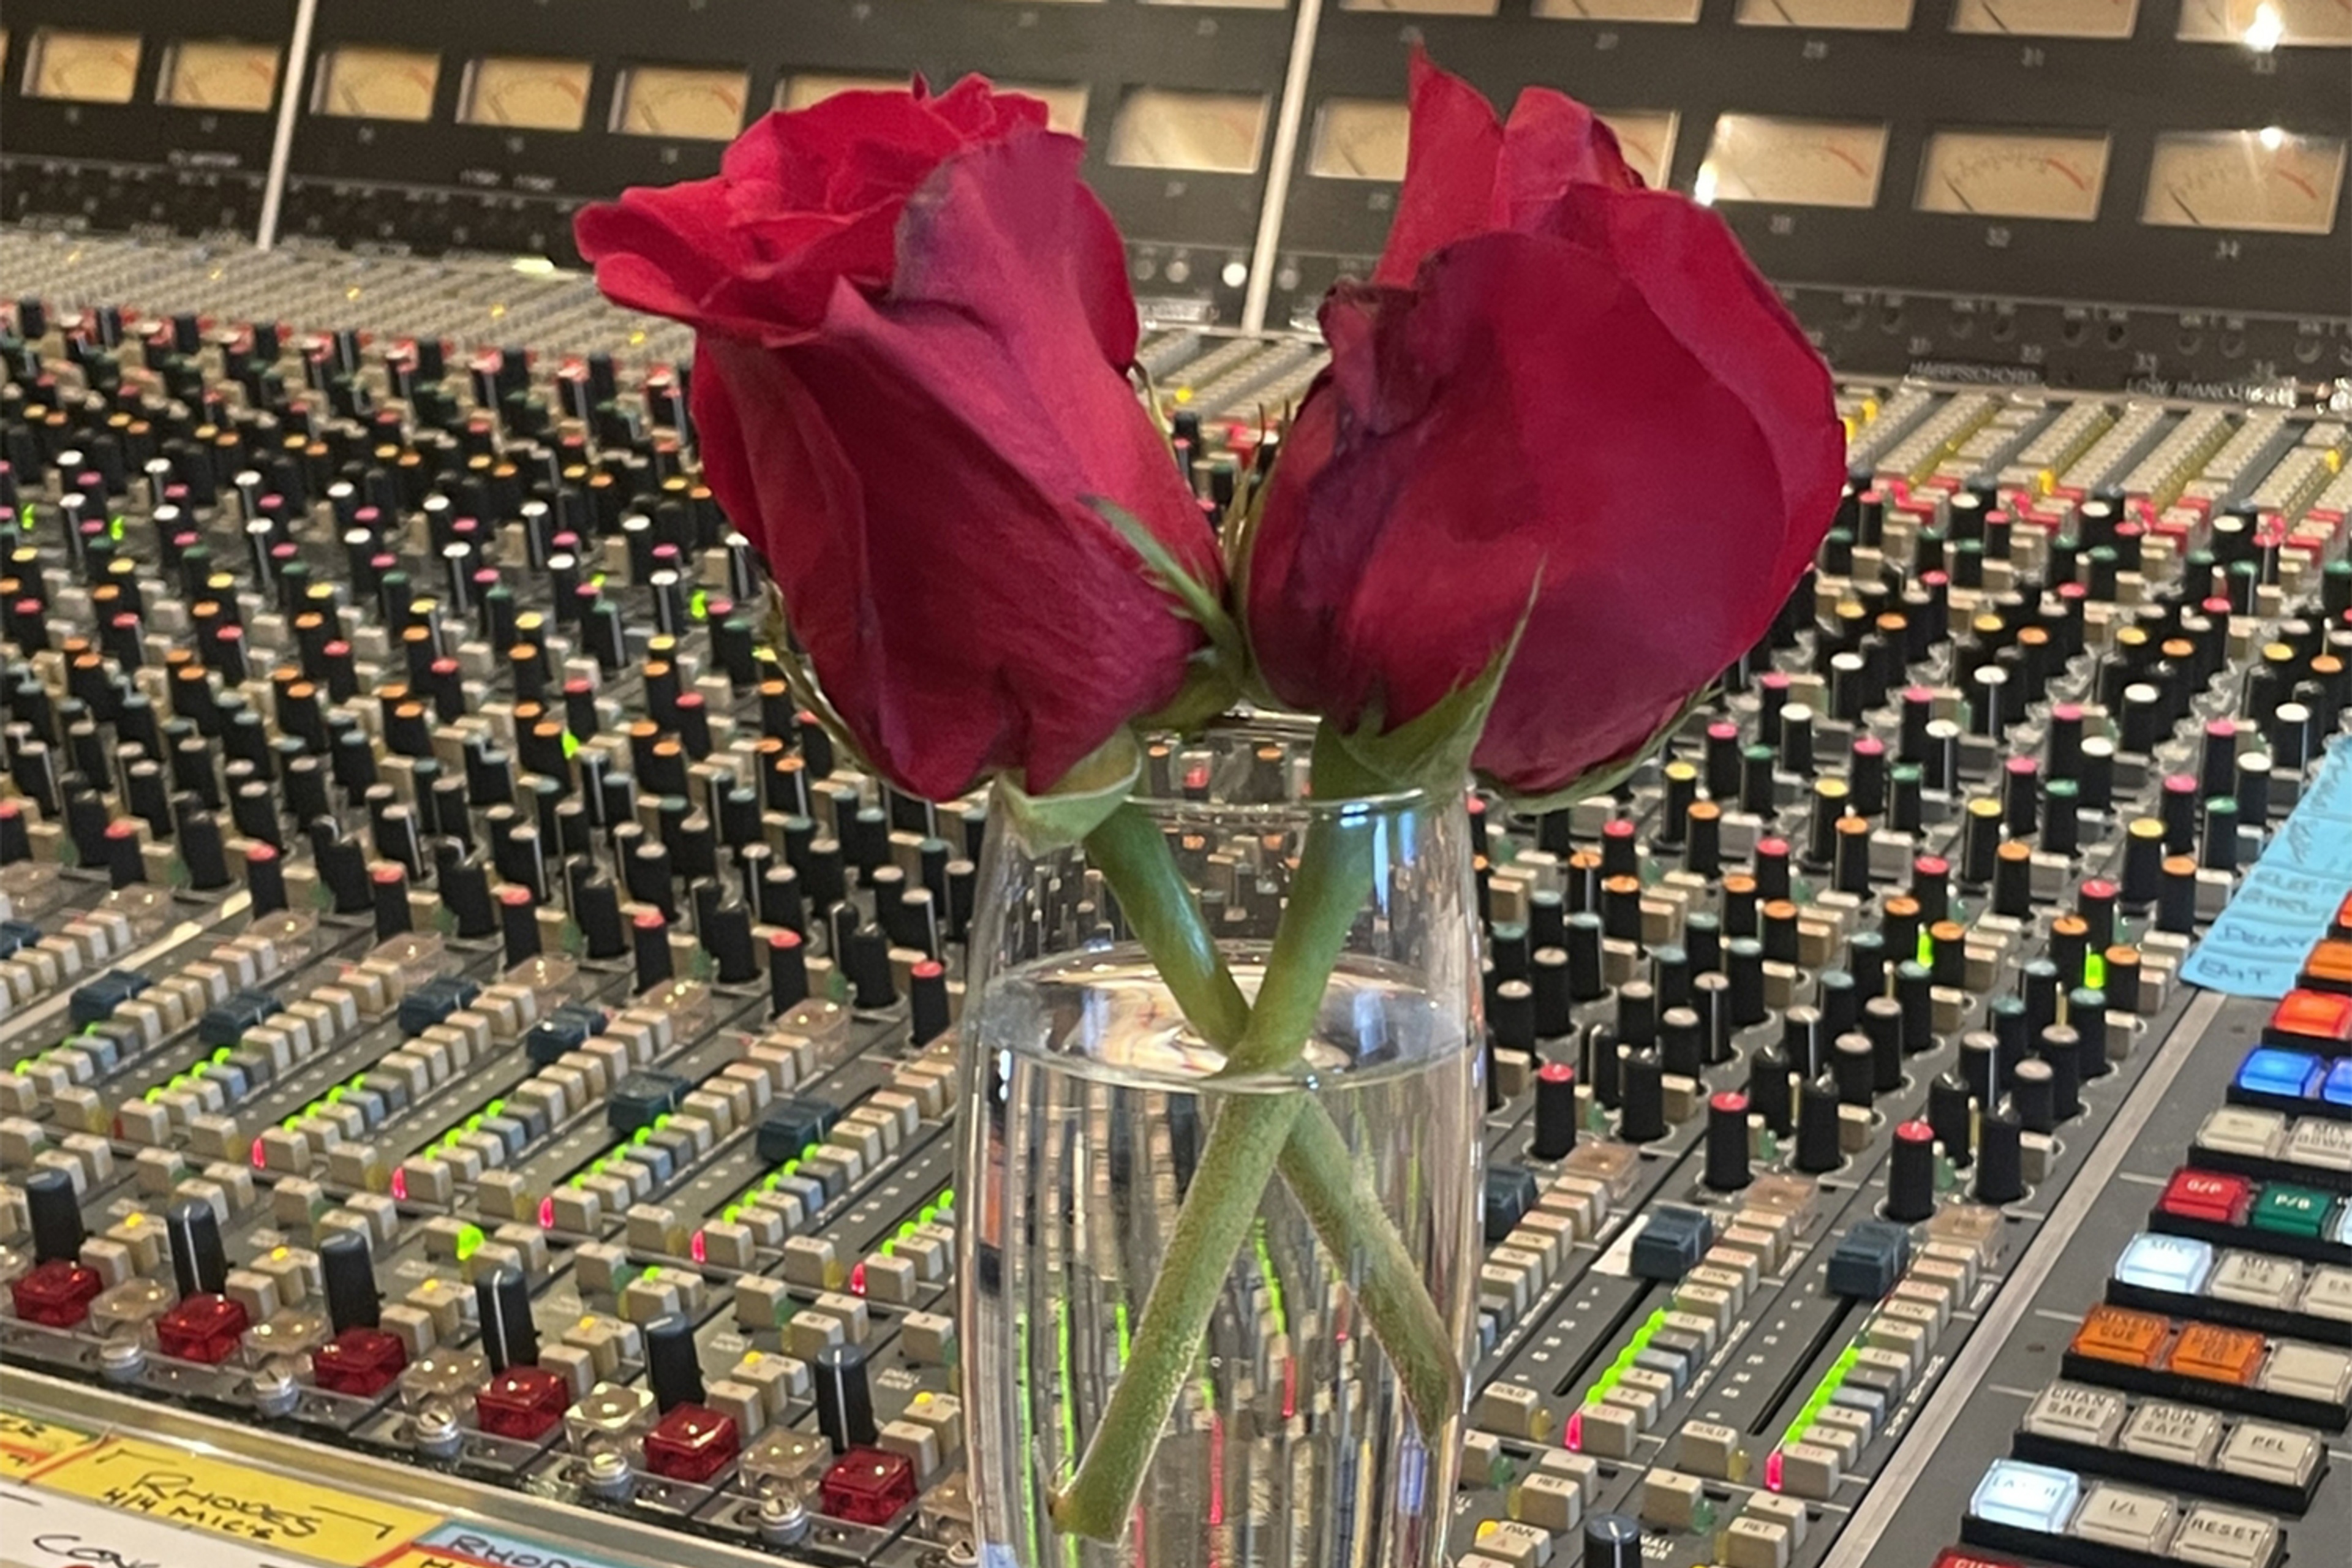 Two red roses in a glass, perched on a mixing desk